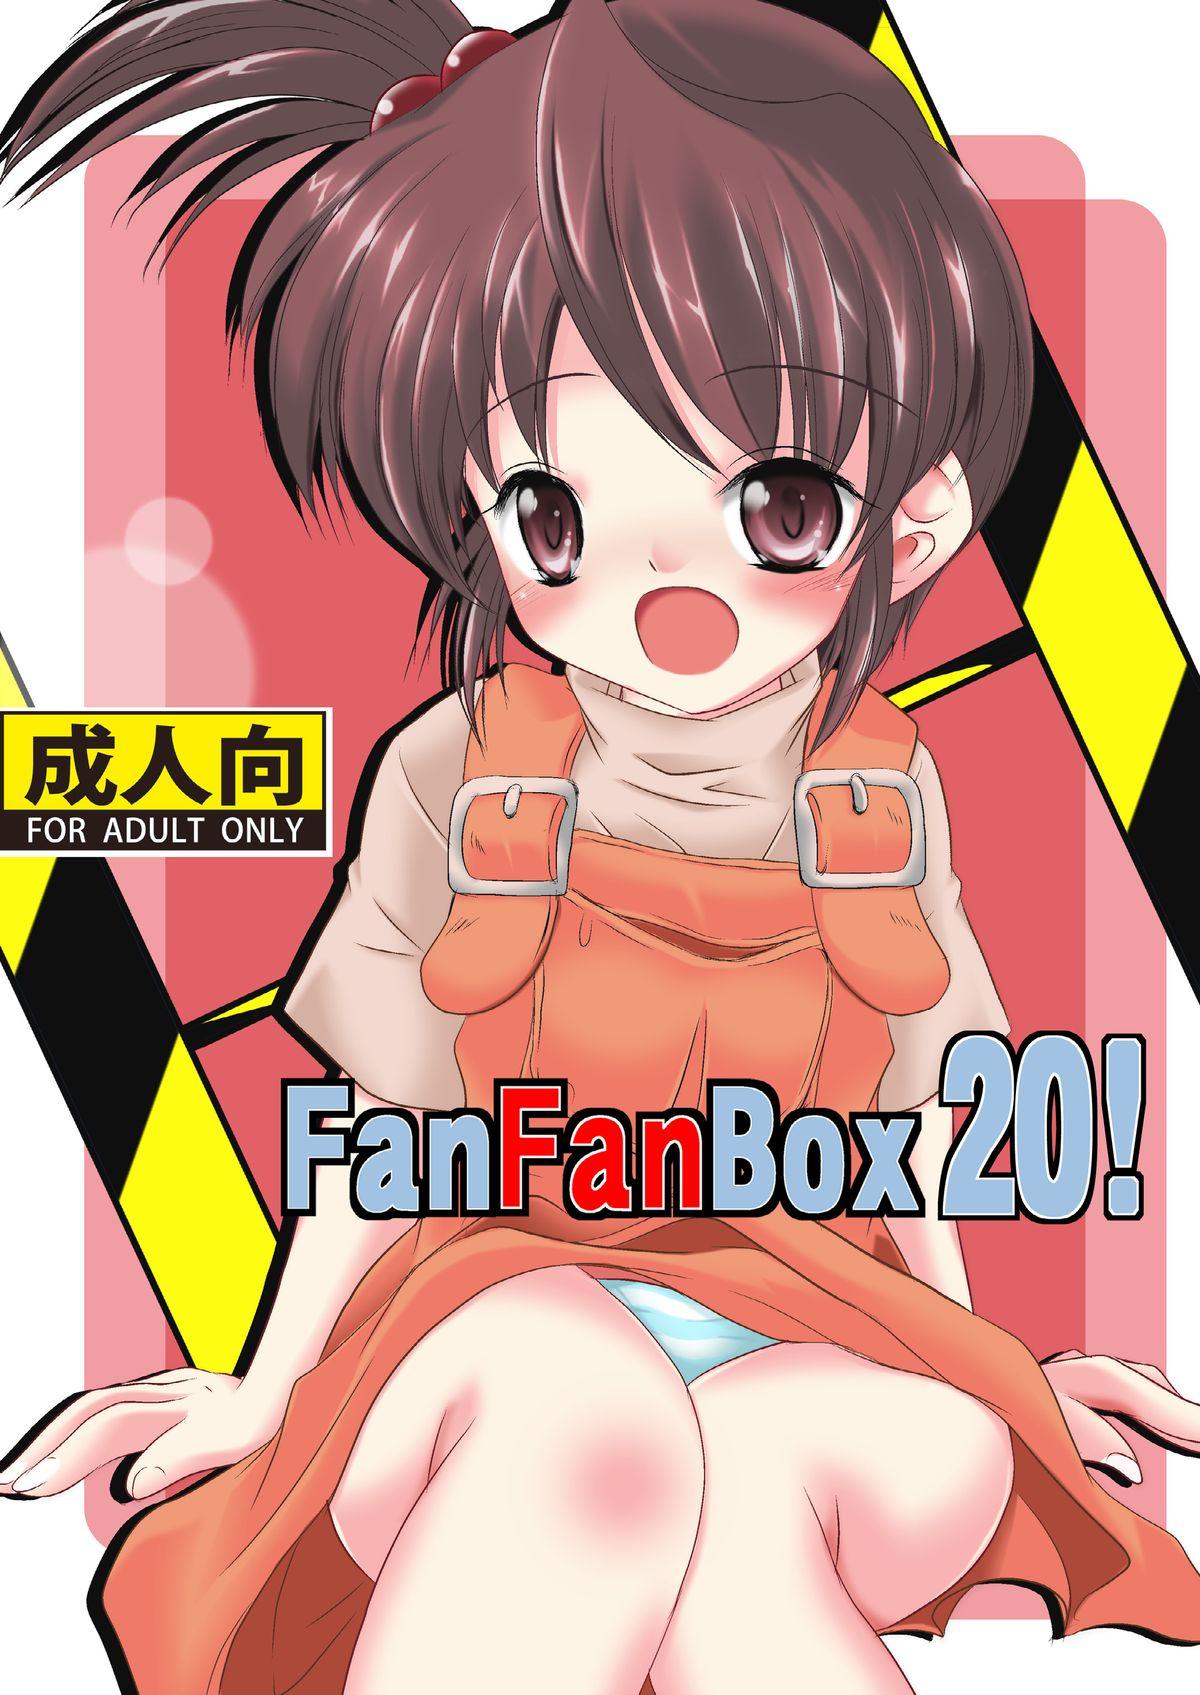 Pussy Play FanFanBox 20! - The melancholy of haruhi suzumiya 18 Porn - Page 1